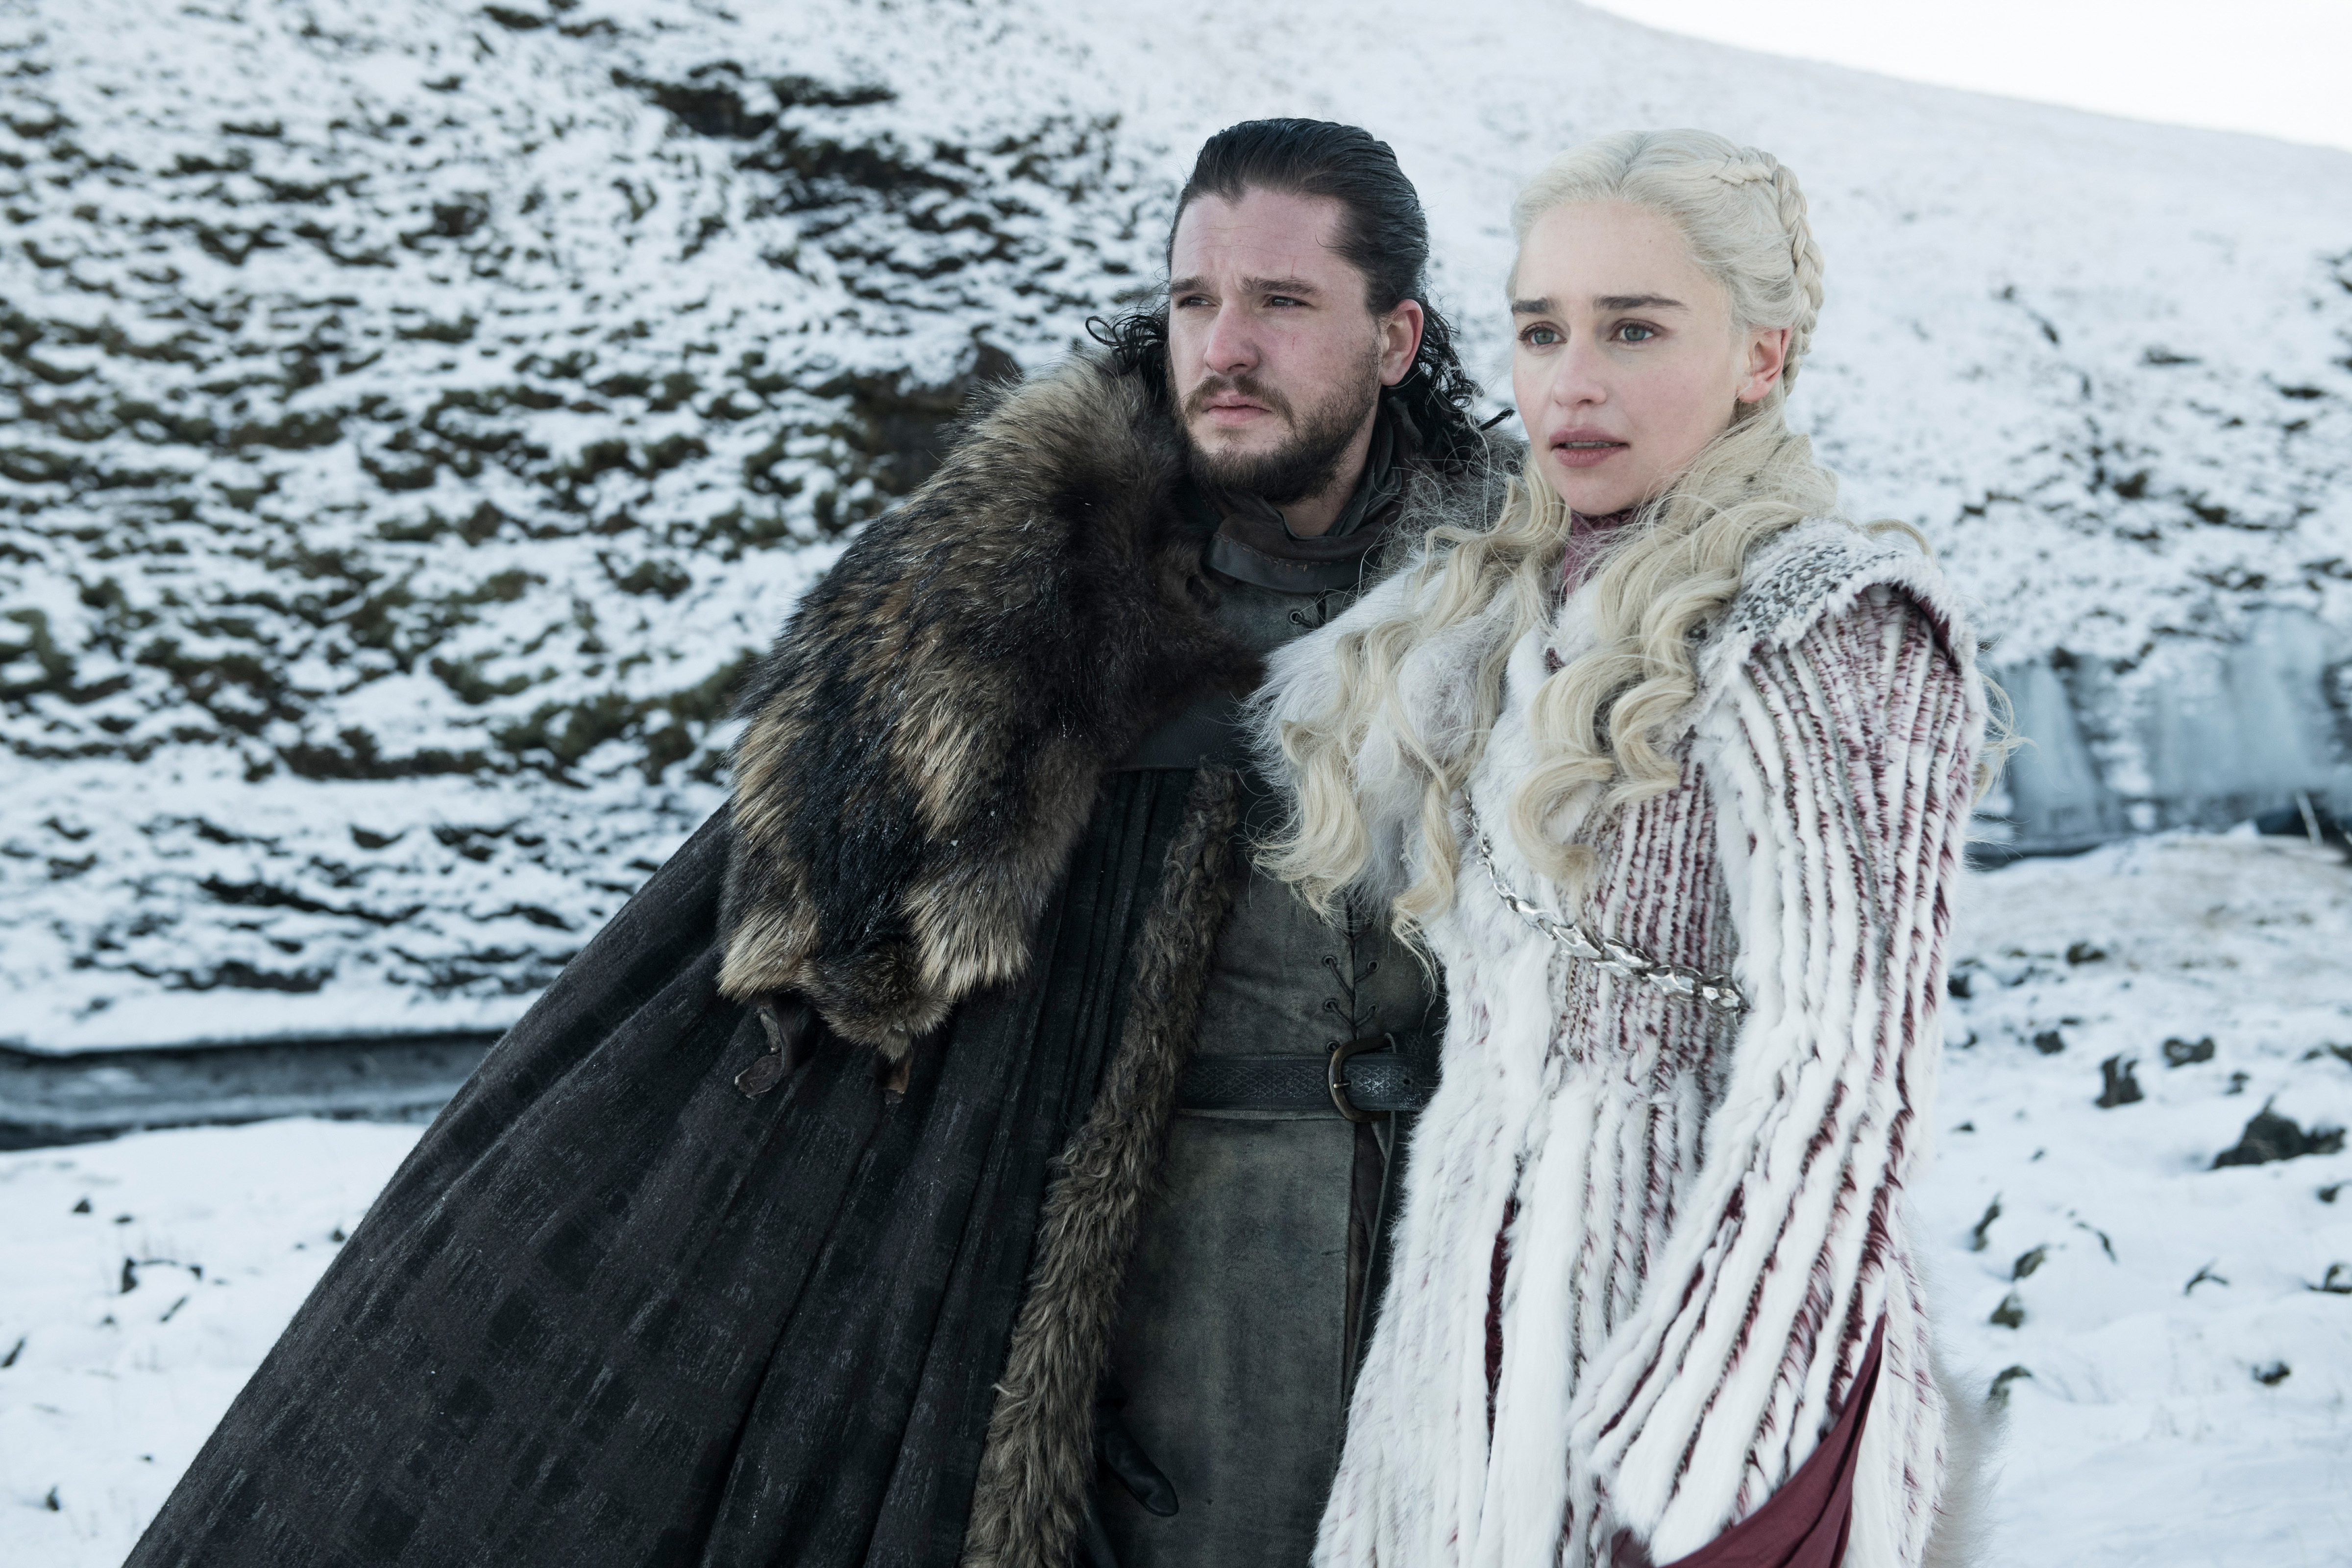 'Game of Thrones' premieres its final season on HBO this month. (HBO)